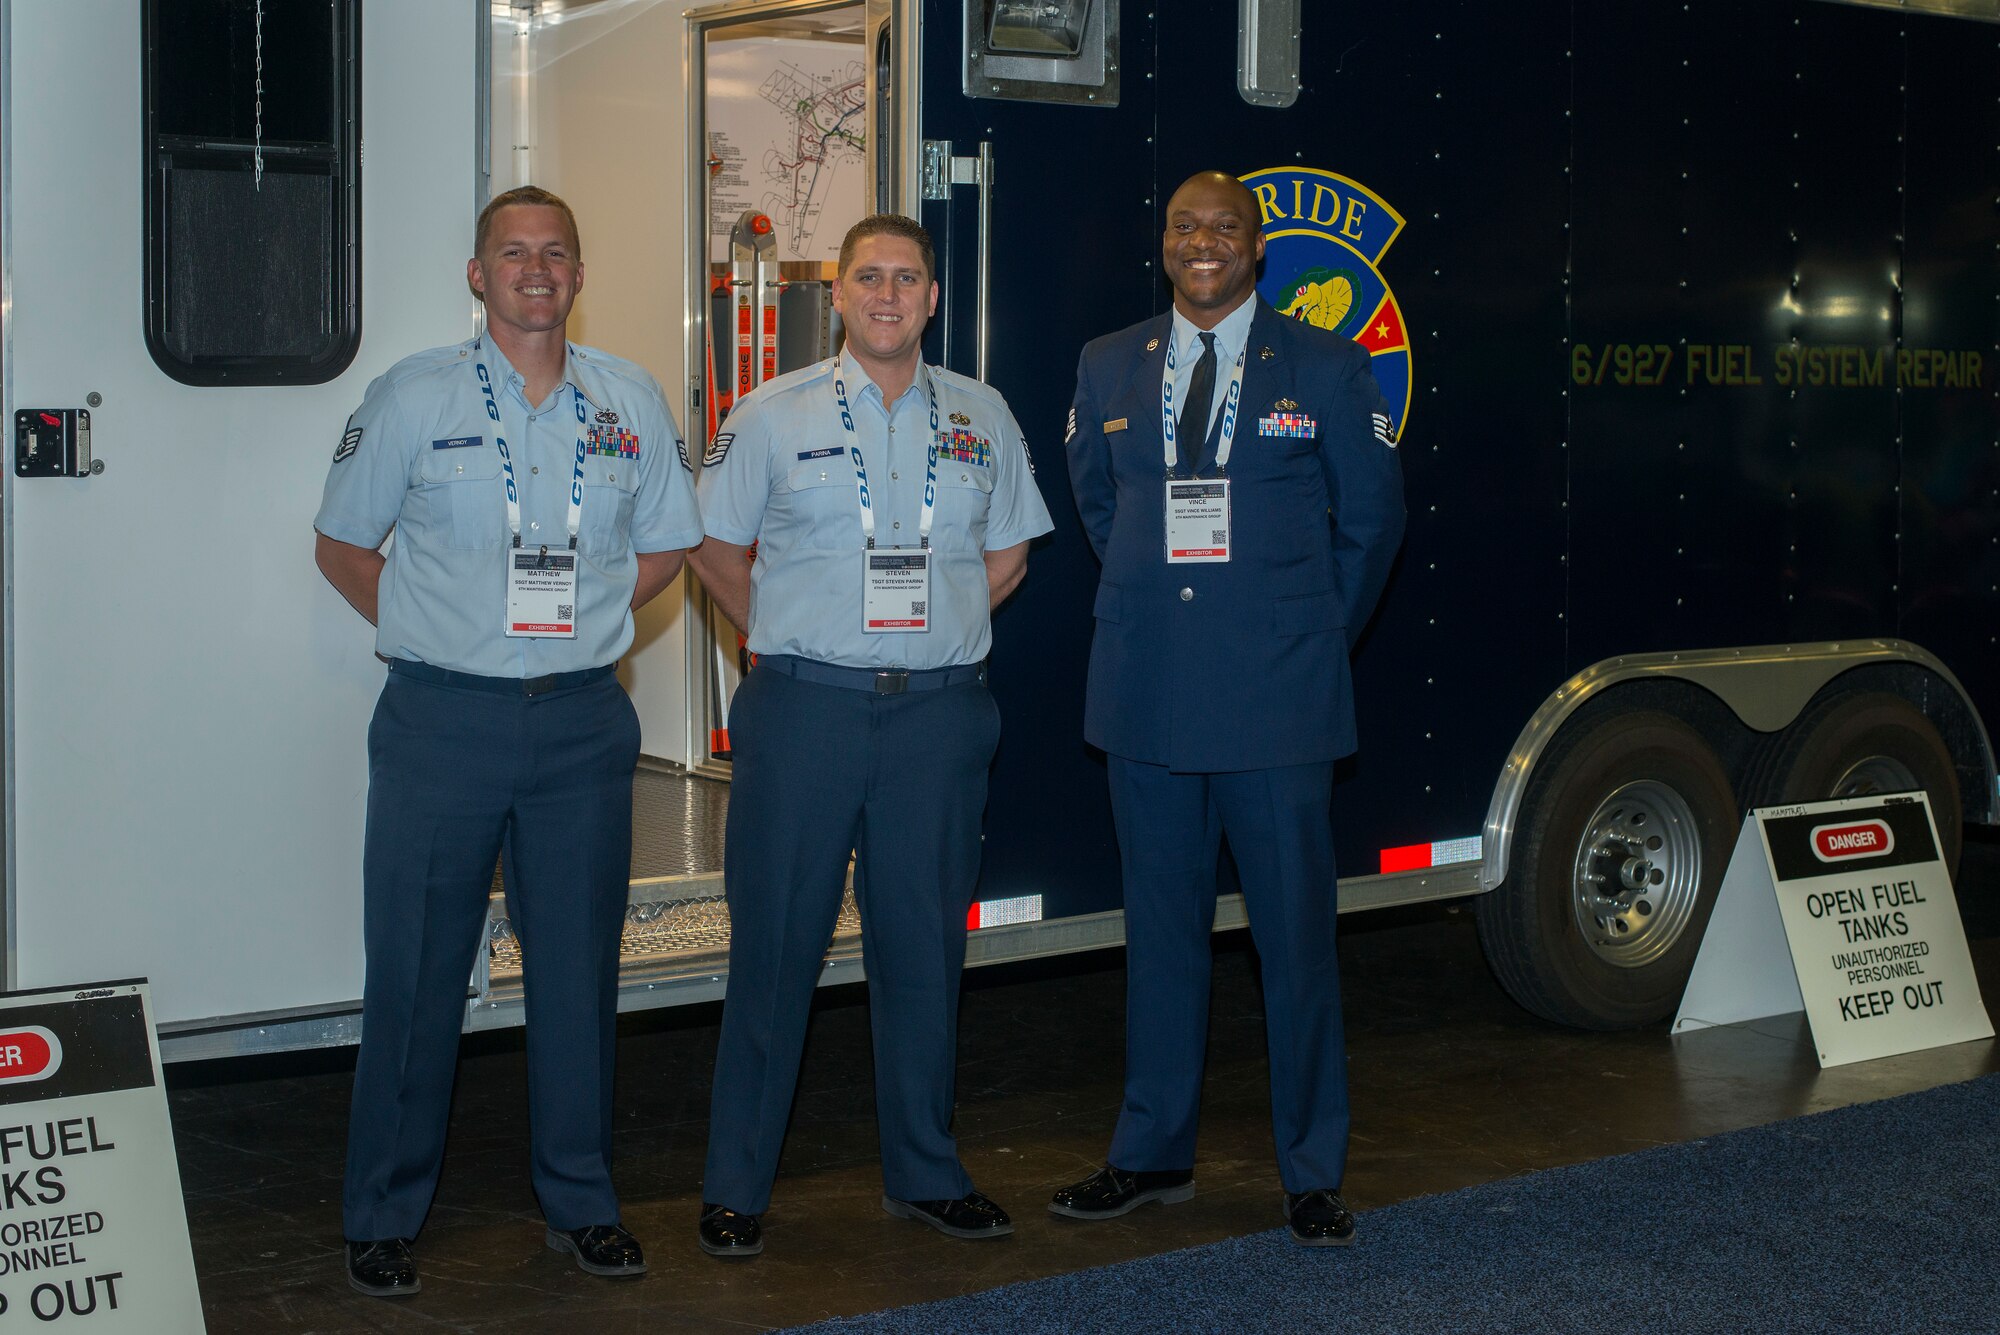 From left: U.S. Air Force Staff Sgt. Matthew Vernoy, 6th Aircraft Maintenance Squadron (6 AMX) fuel systems craftsman, Tech. Sgt. Steven Parina, 6th AMXS fuels NCOIC and Staff Sgt. Vince Williams, 927th Maintenance Group fuels mechanic, pause for a photo at the 2018 Department of Defense Maintenance Symposium, Tampa, Fla., Dec. 19, 2018.